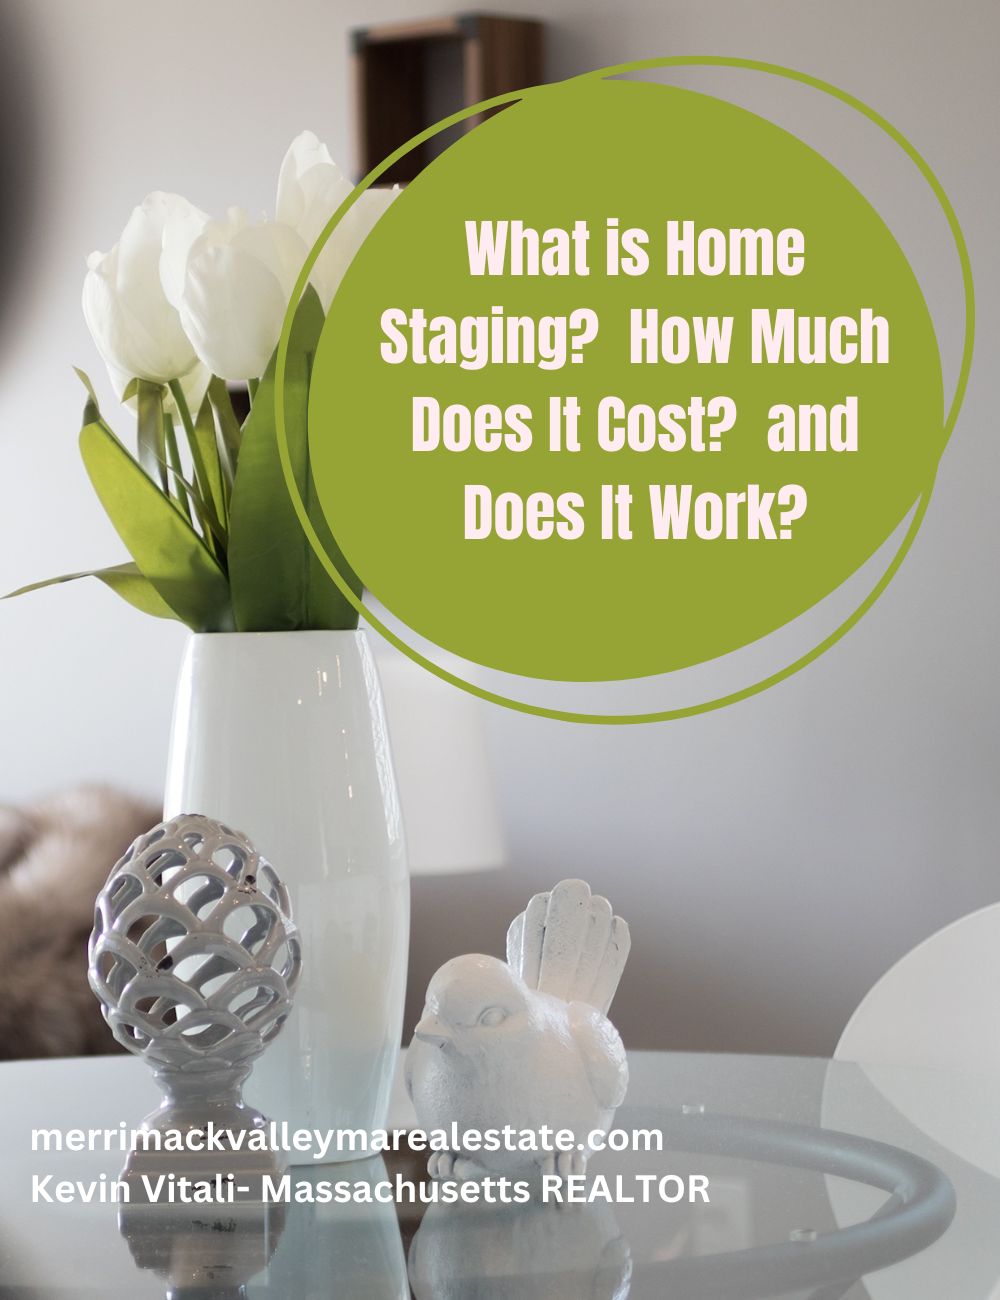 What is Home Staging?